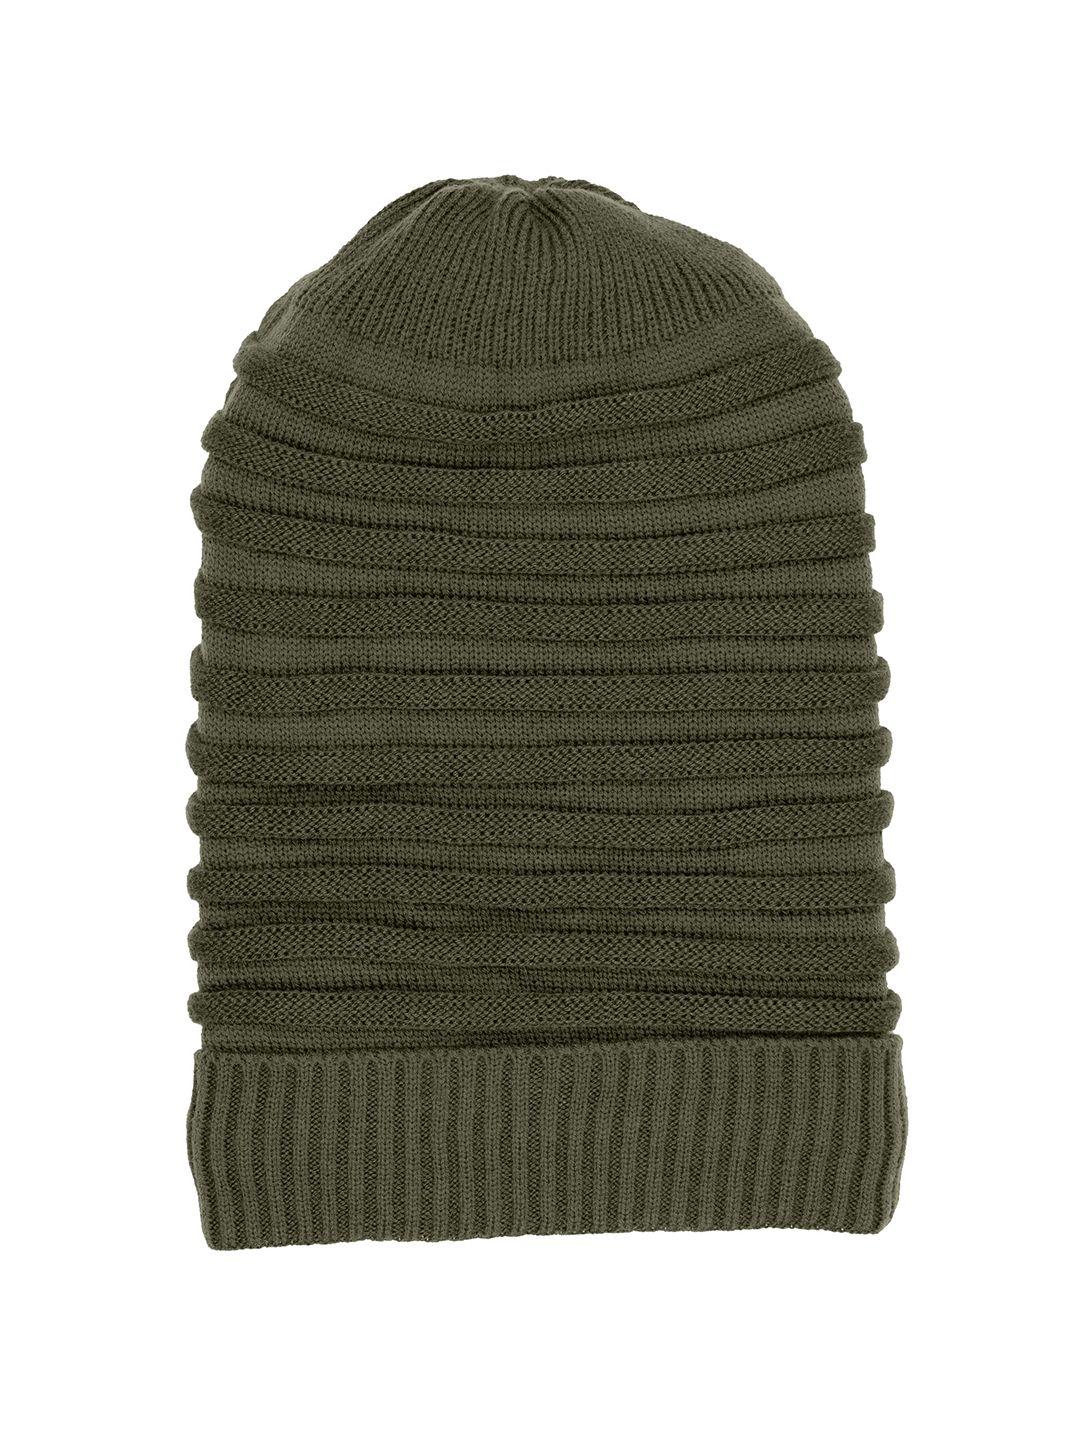 status quo men olive green knitted beanie